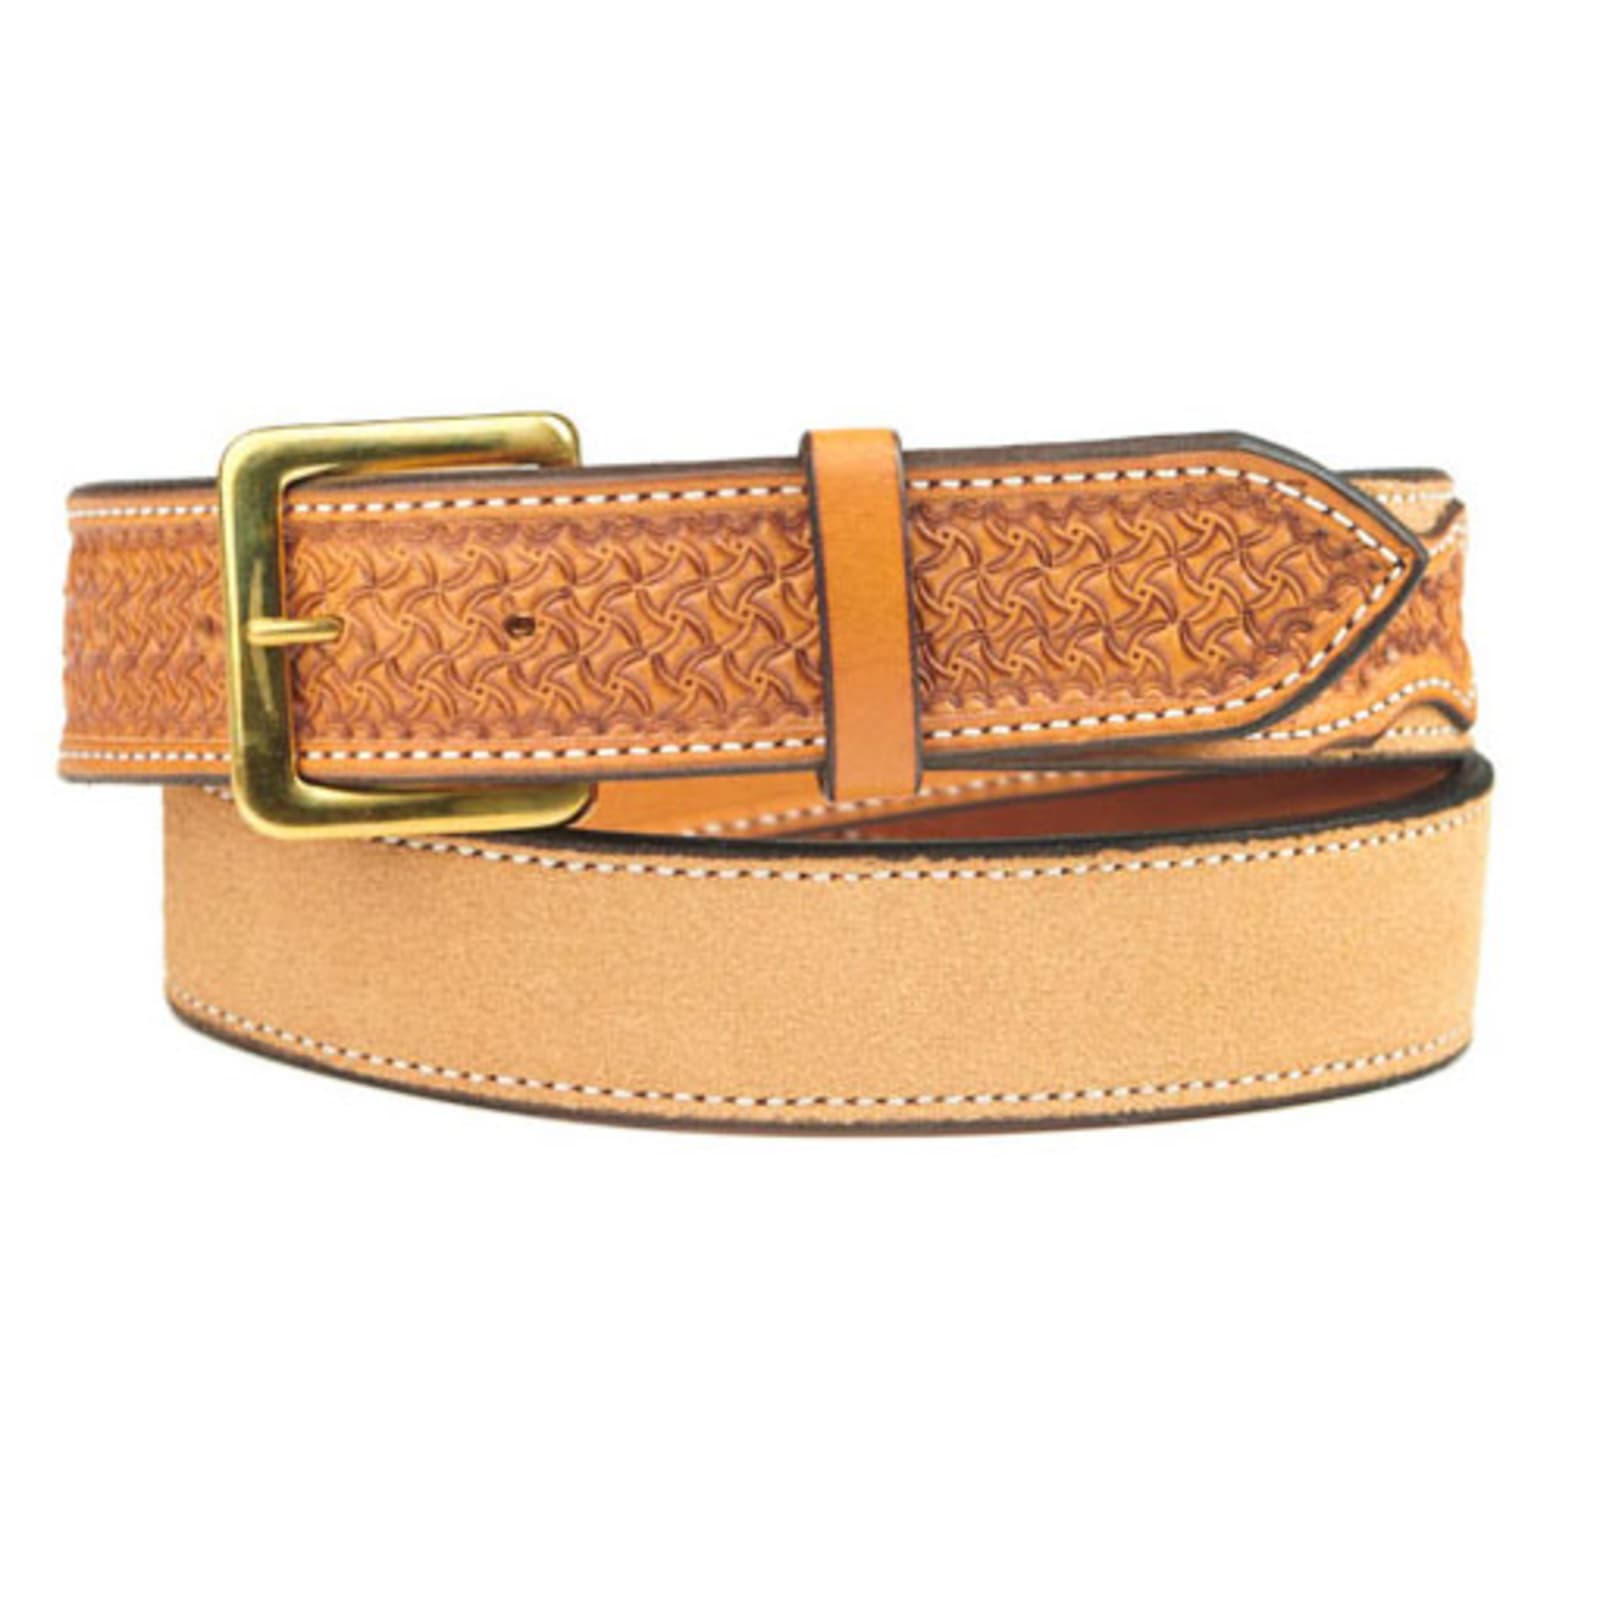 Texas Saddlery Men's Light Tan Leather Western Belt available at Cavenders